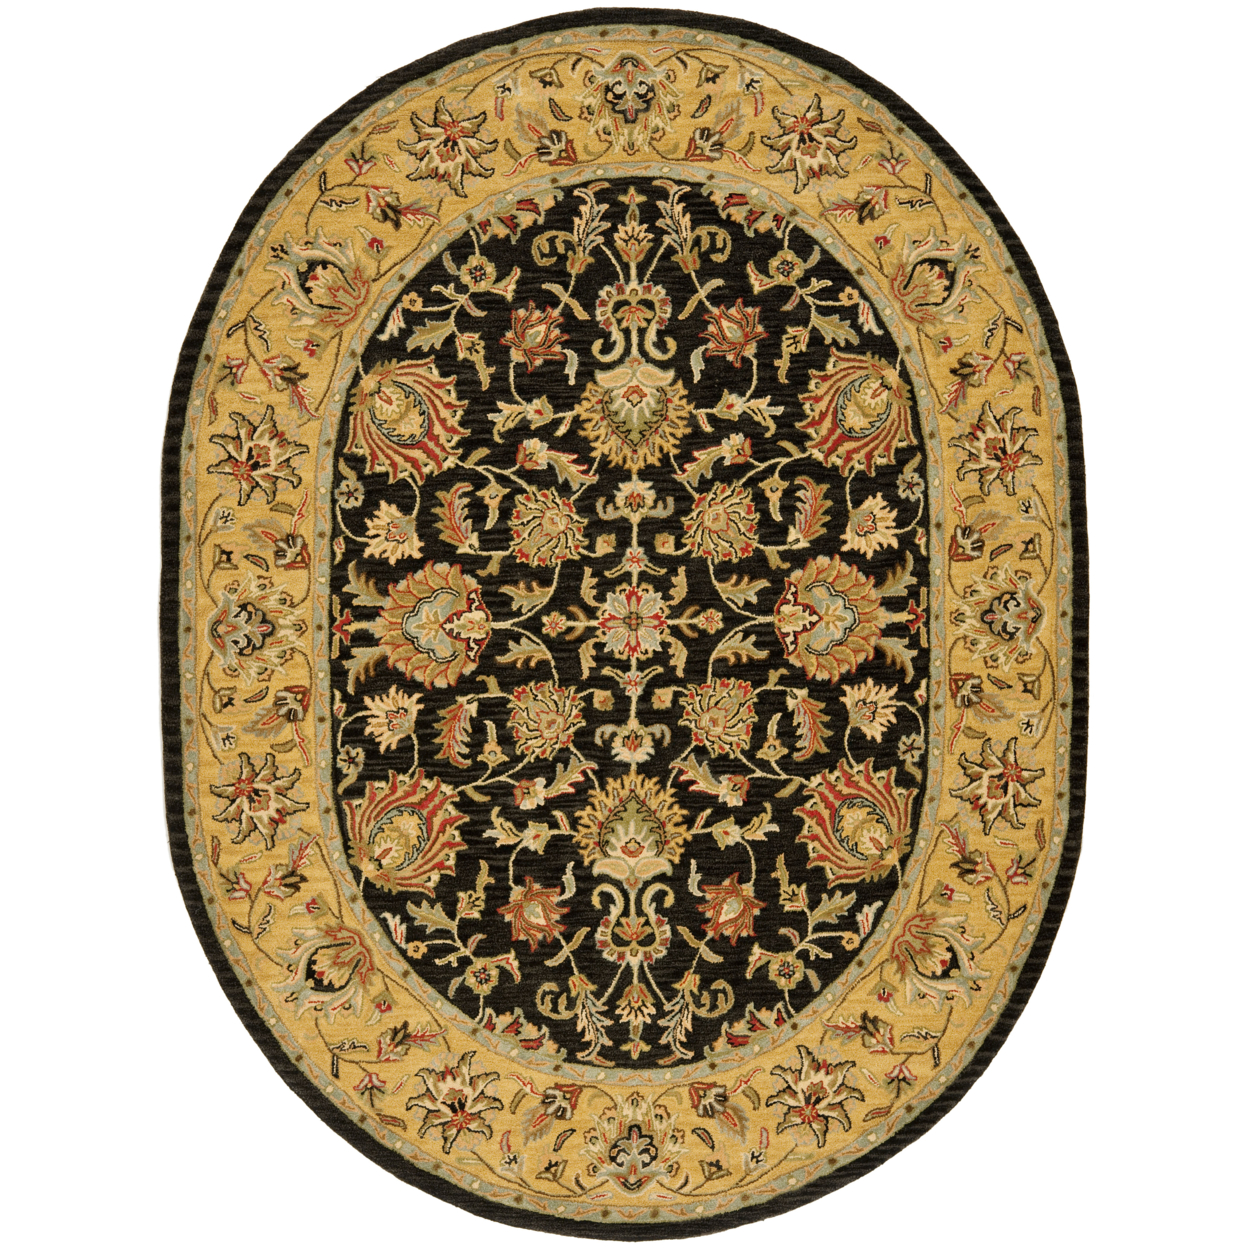 SAFAVIEH Heritage Regis Traditional Wool Area Rug, Charcoal/Gold, 7'6" x 9'6" Oval - image 1 of 10